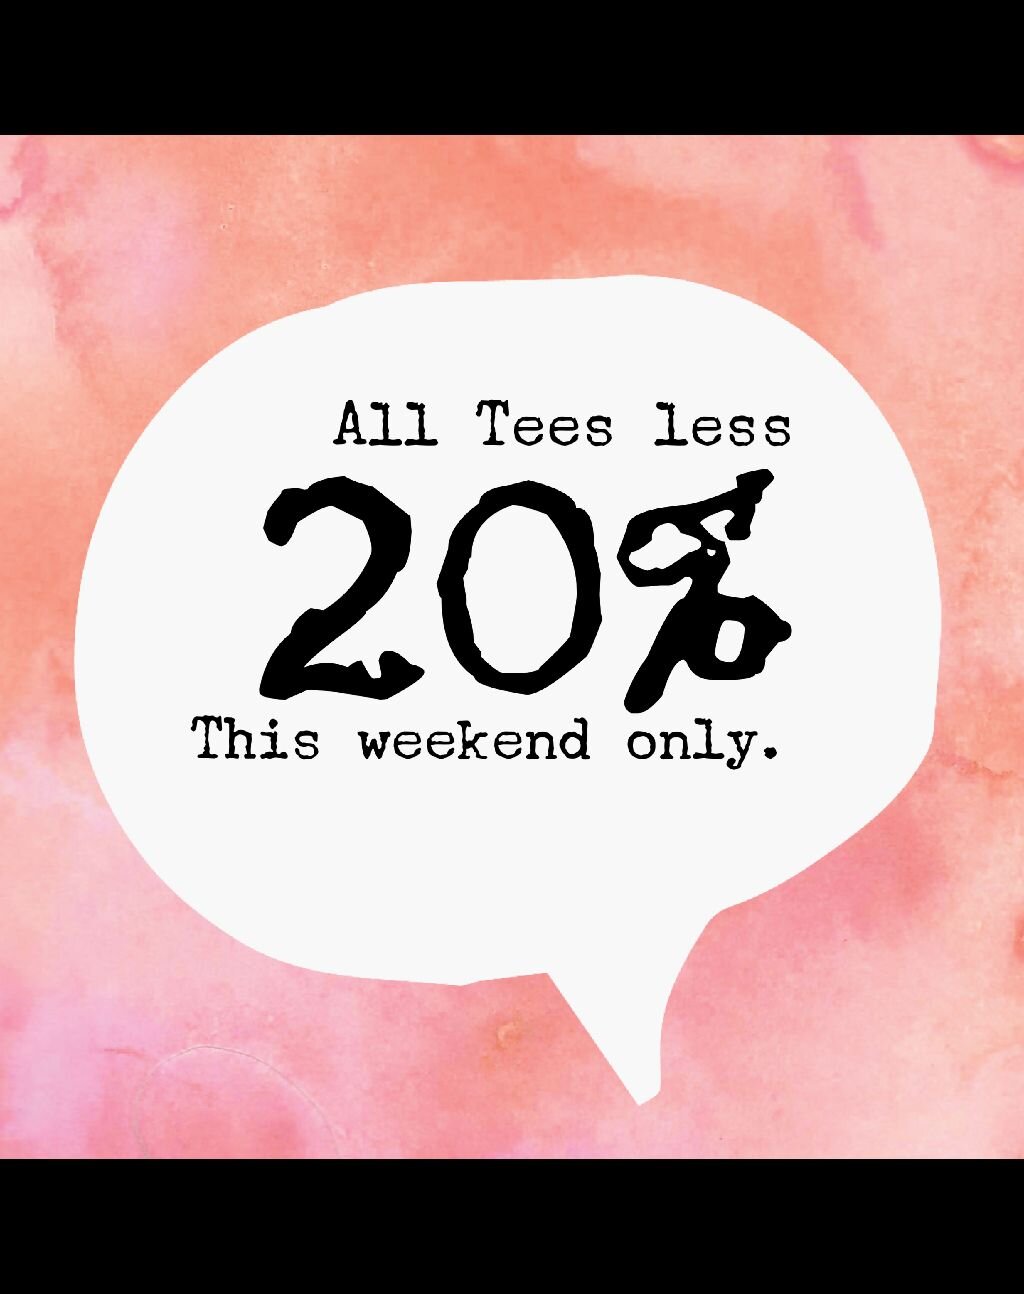 Enjoy 20% Off with code TEE20
Valid until July 23